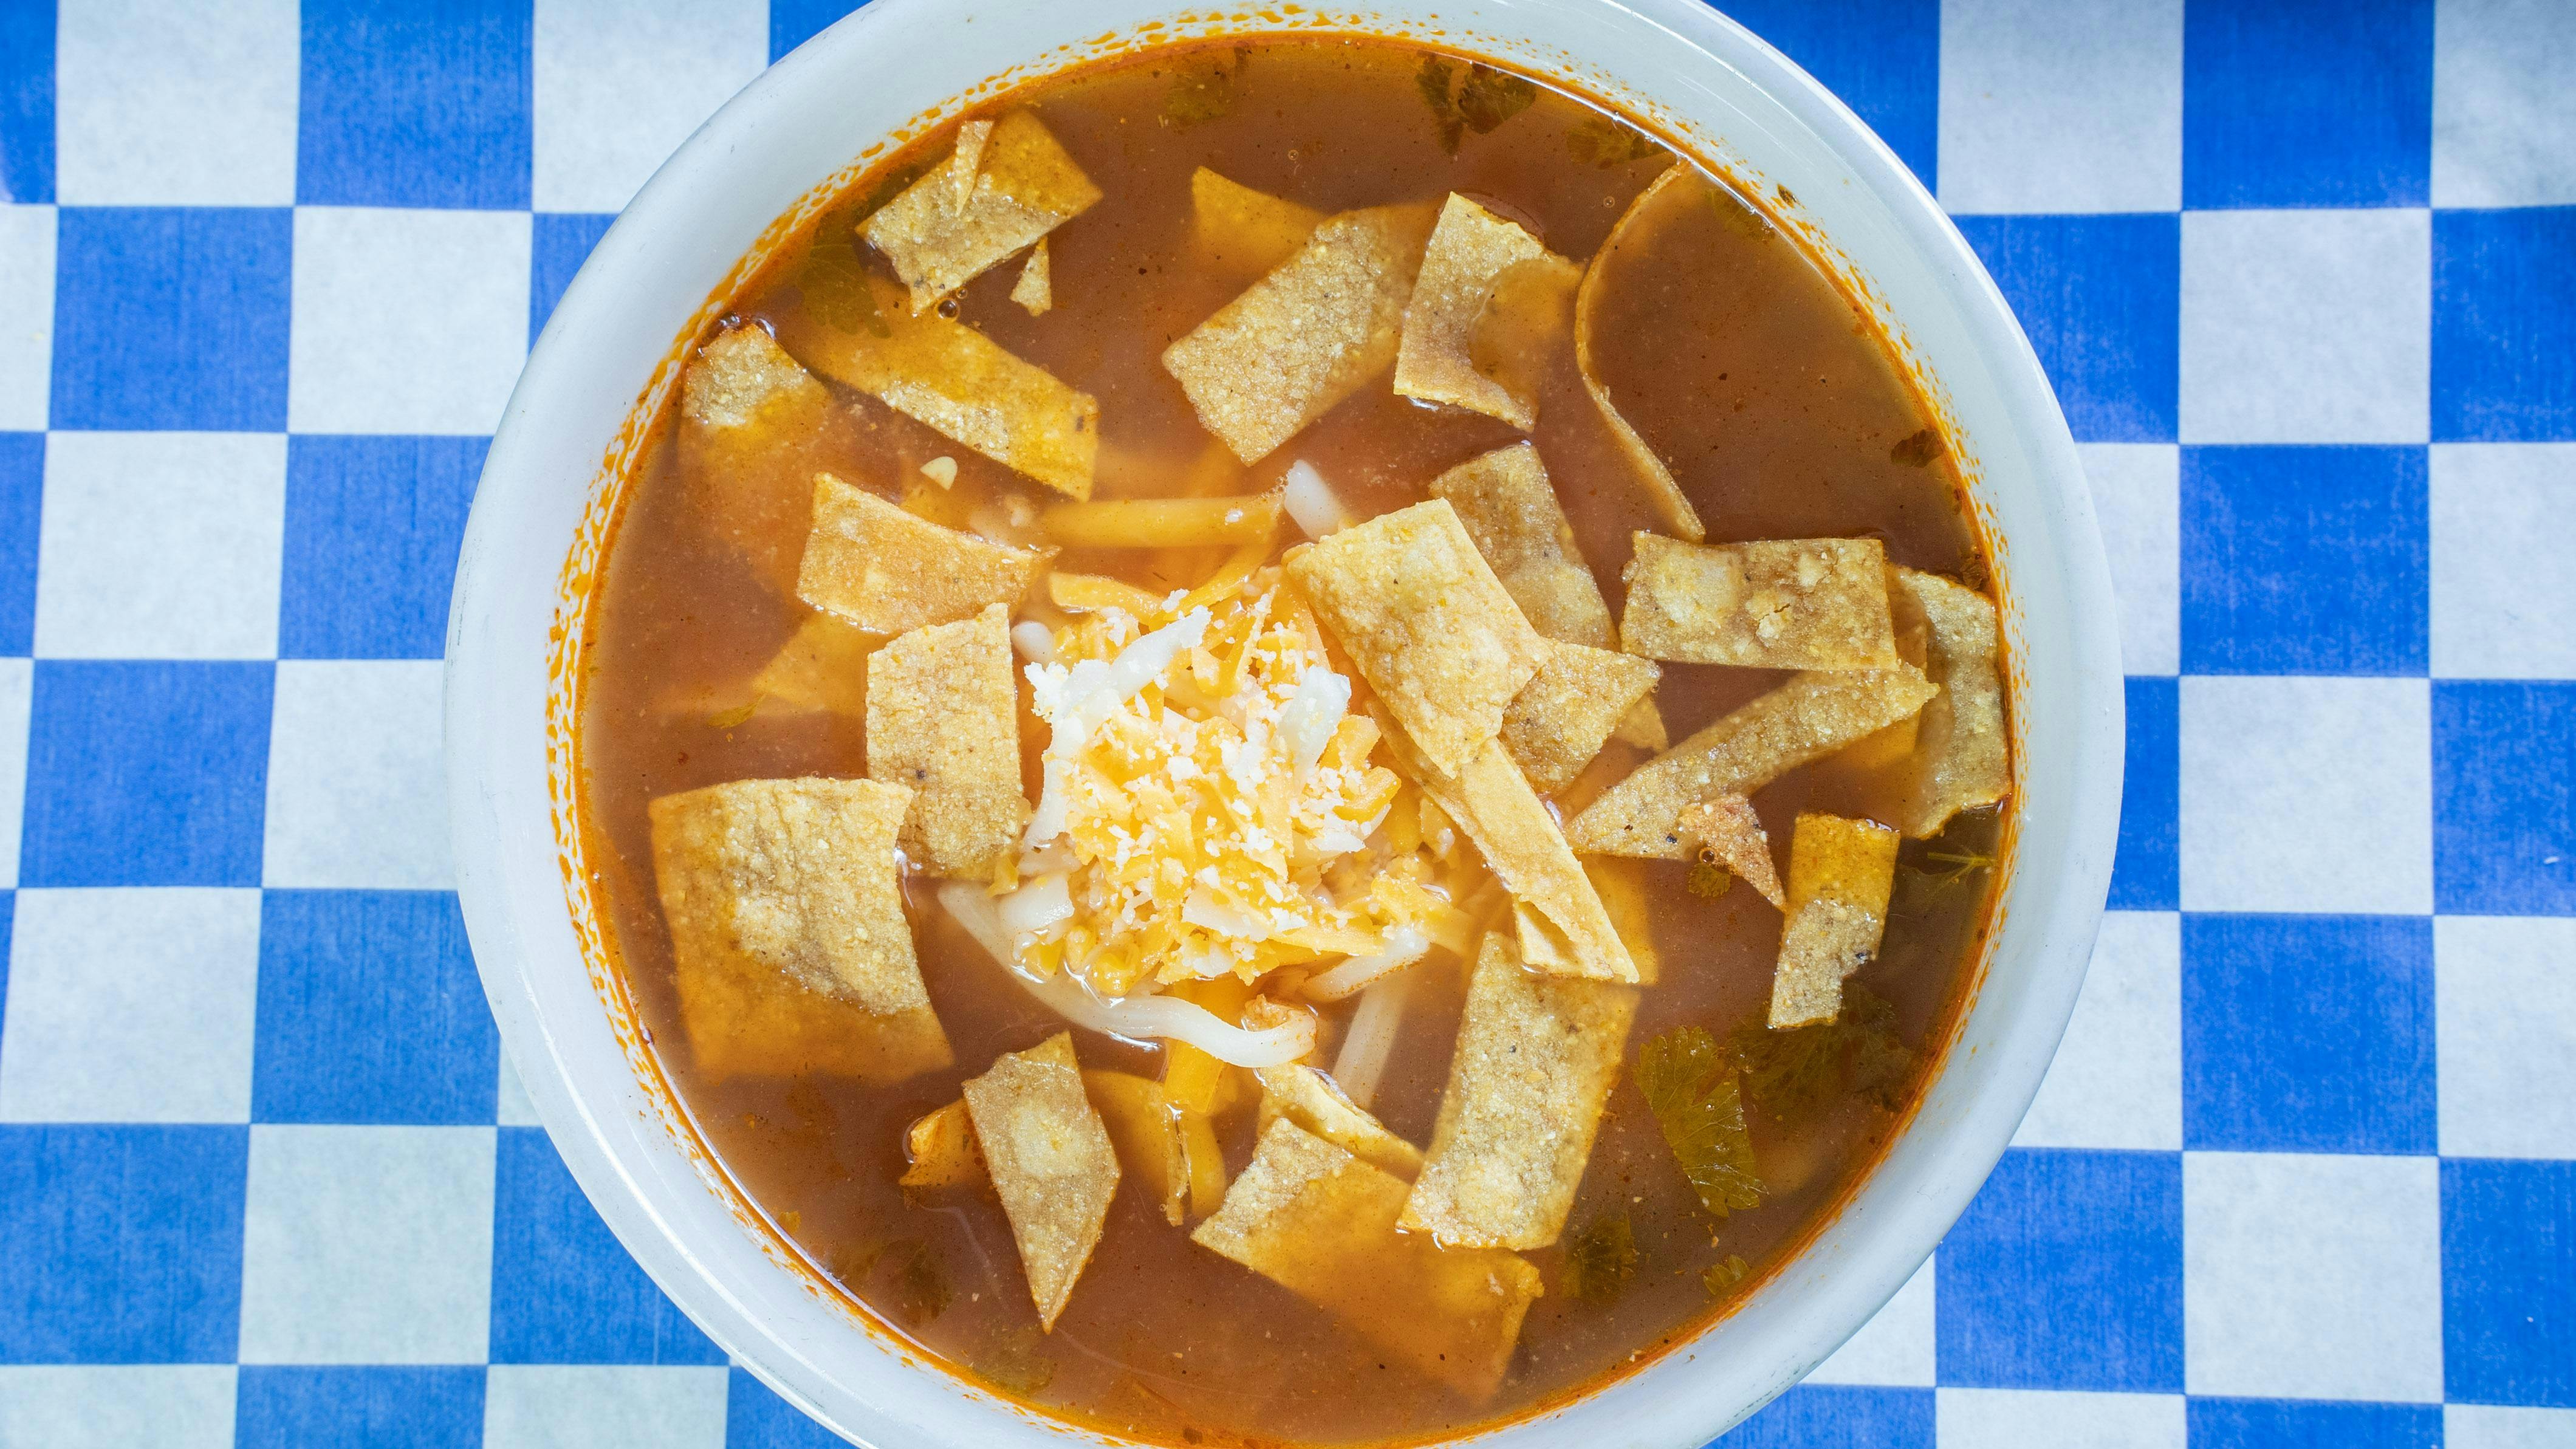 Tortilla Soup from Austin Salad Company - East 6th St in Austin, TX